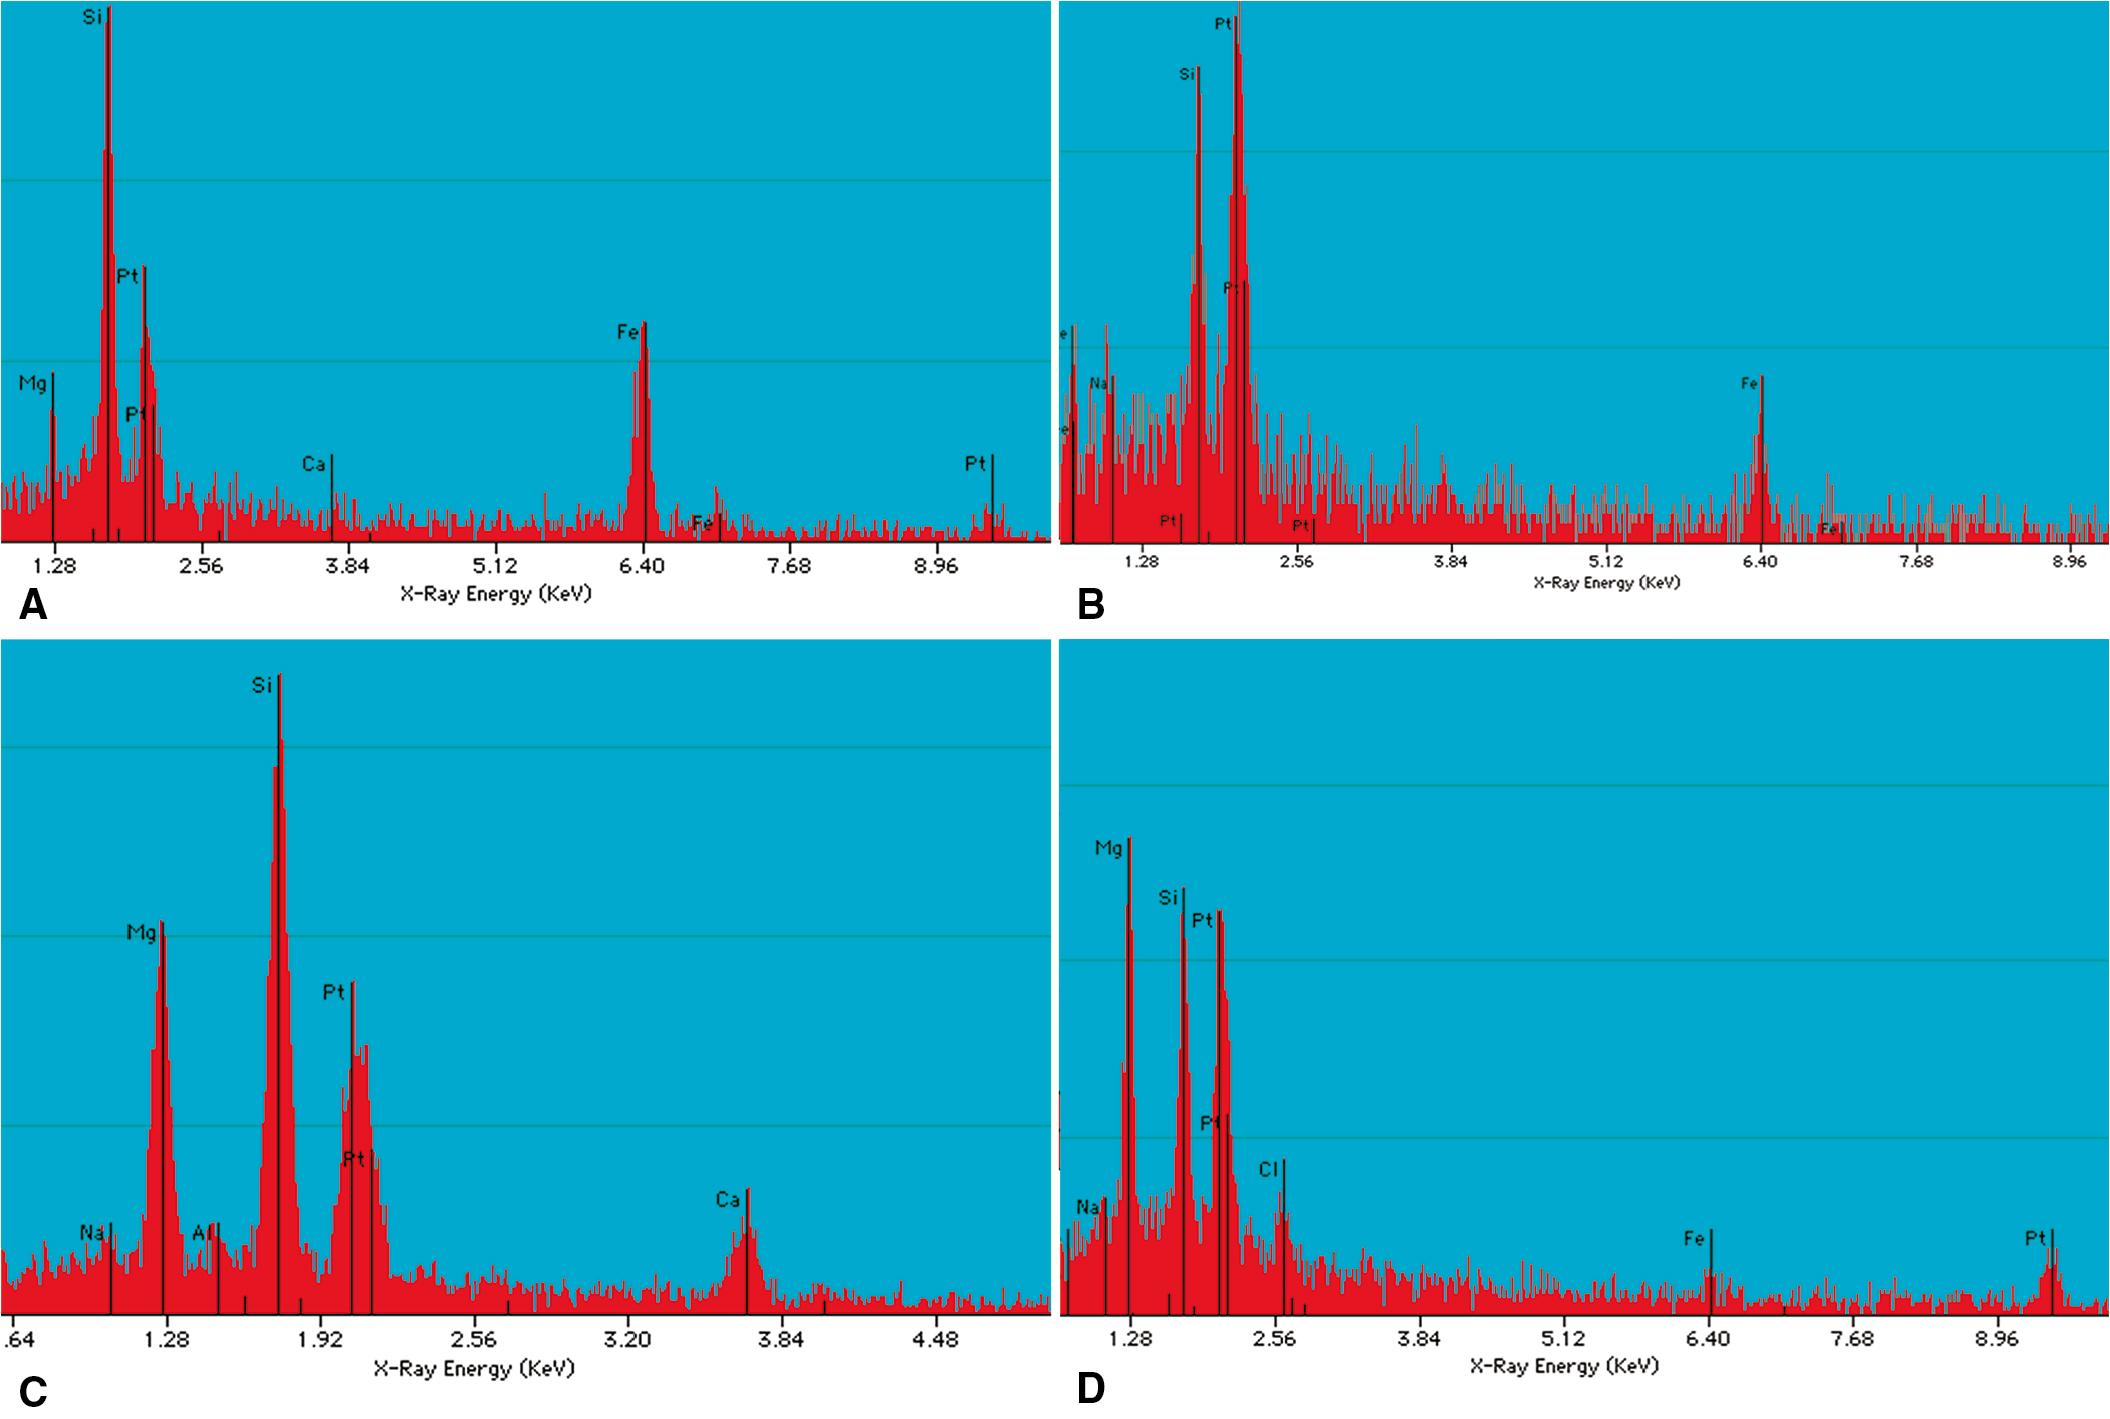 Figure 10.47, Asbestosis. Energy-dispersive x-ray analysis spectra showing characteristic elemental composition of types of asbestos. (A) Amosite has a prominent peak for silicon (Si) as well as peaks for magnesium (Mg) and iron (Fe) . (B) Crocidolite shows a peak for sodium (Na) in addition to silicon and iron. (C) Tremolite demonstrates peaks for silicon, magnesium, and calcium (Ca) . (D) Chrysotile exhibits prominent peaks for magnesium and silicon. The peak for platinum (Pt) represents the coating applied to the specimen prior to electron microscopic examination.